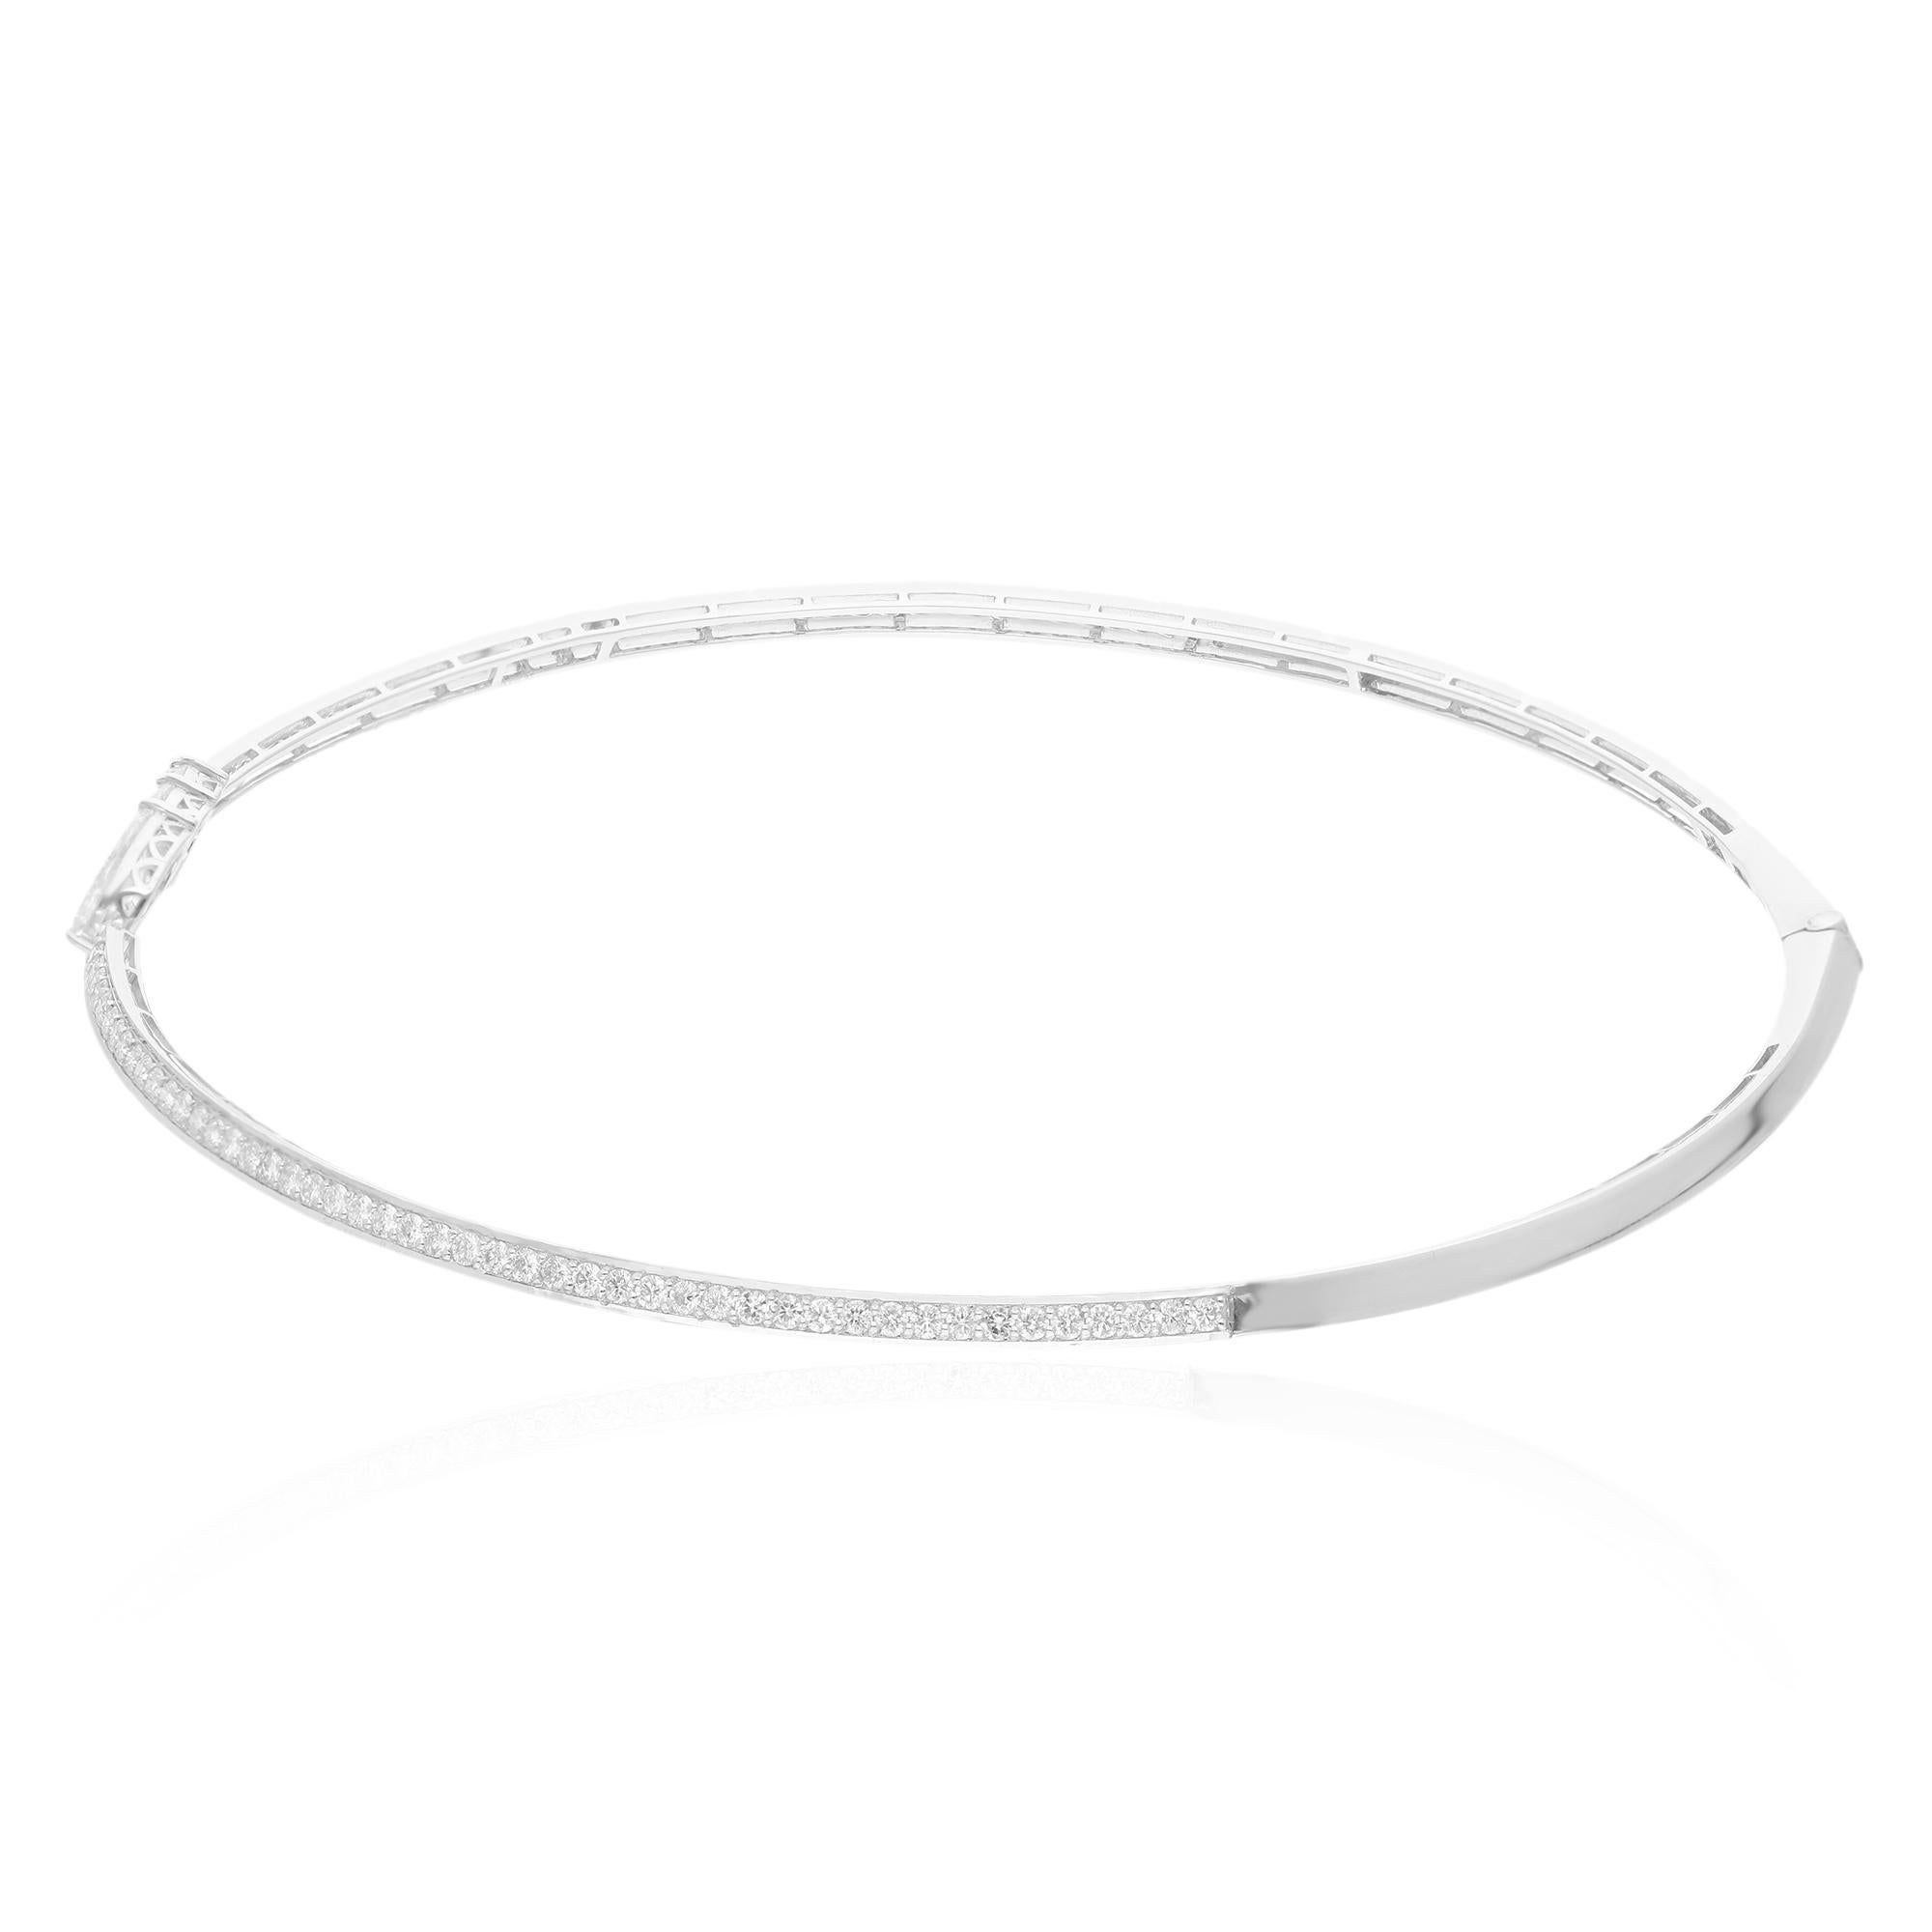 The 14 karat white gold setting provides a luxurious backdrop for the radiant diamonds, adding a touch of timeless elegance to the piece. The cuff design ensures a comfortable and secure fit, while the choker style accentuates the neckline with